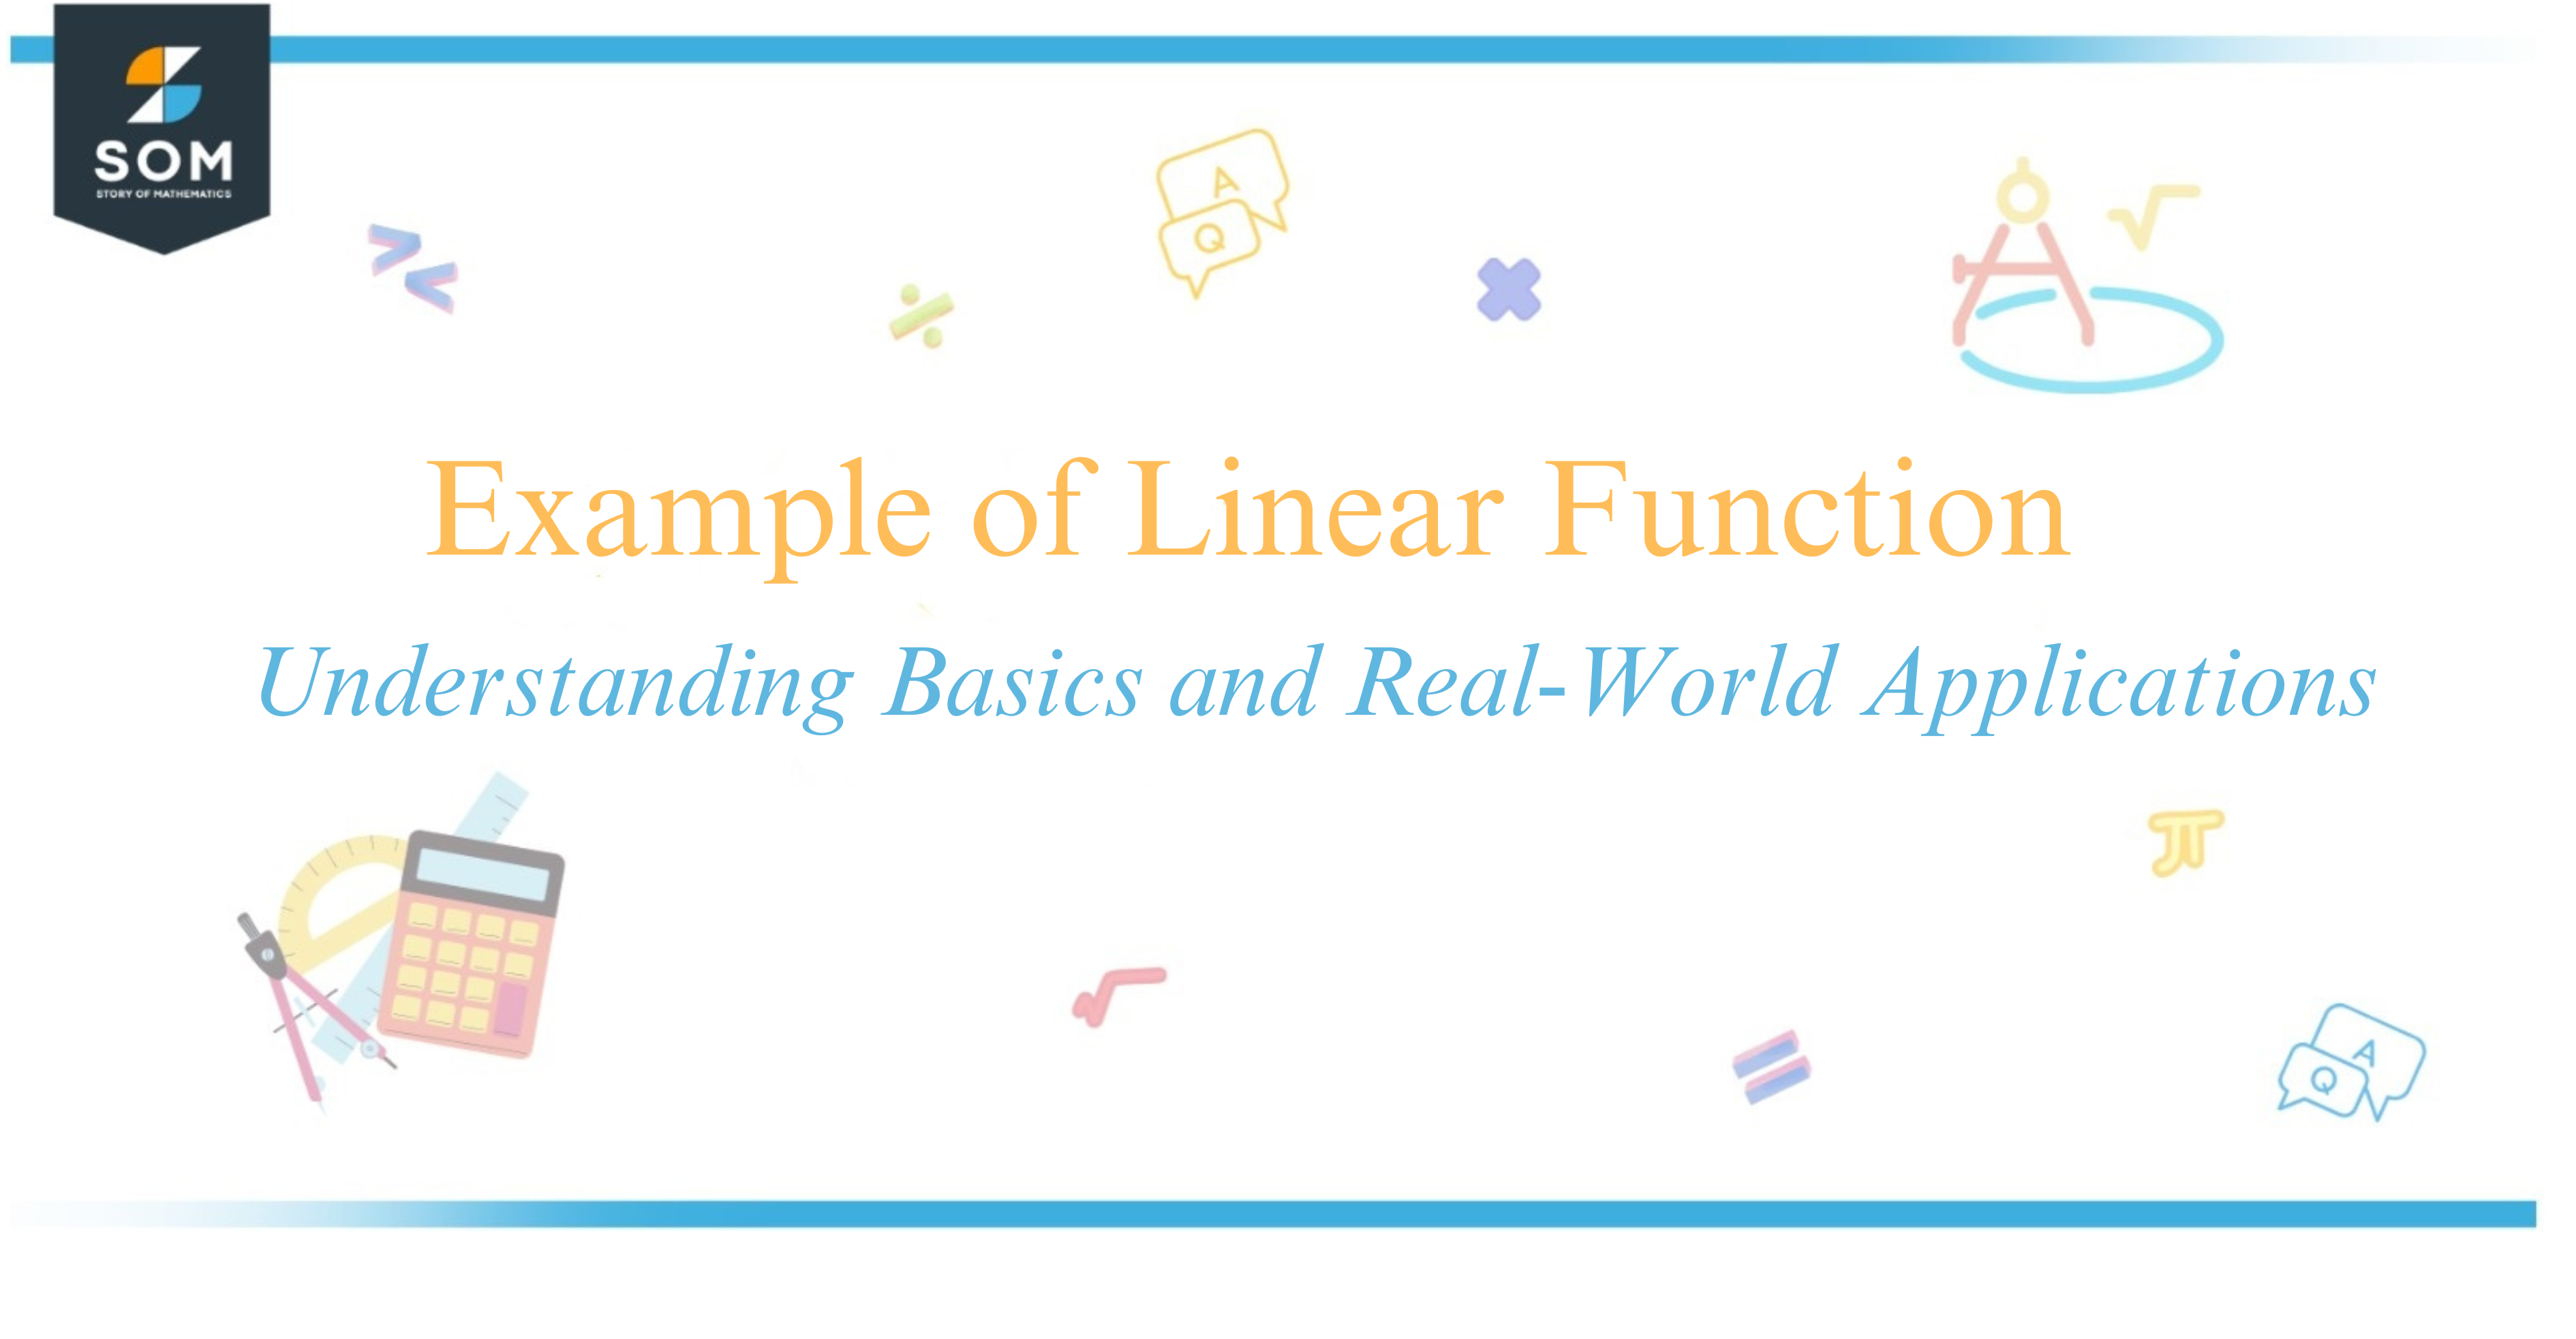 Example of Linear Function Understanding Basics and Real-World Applications